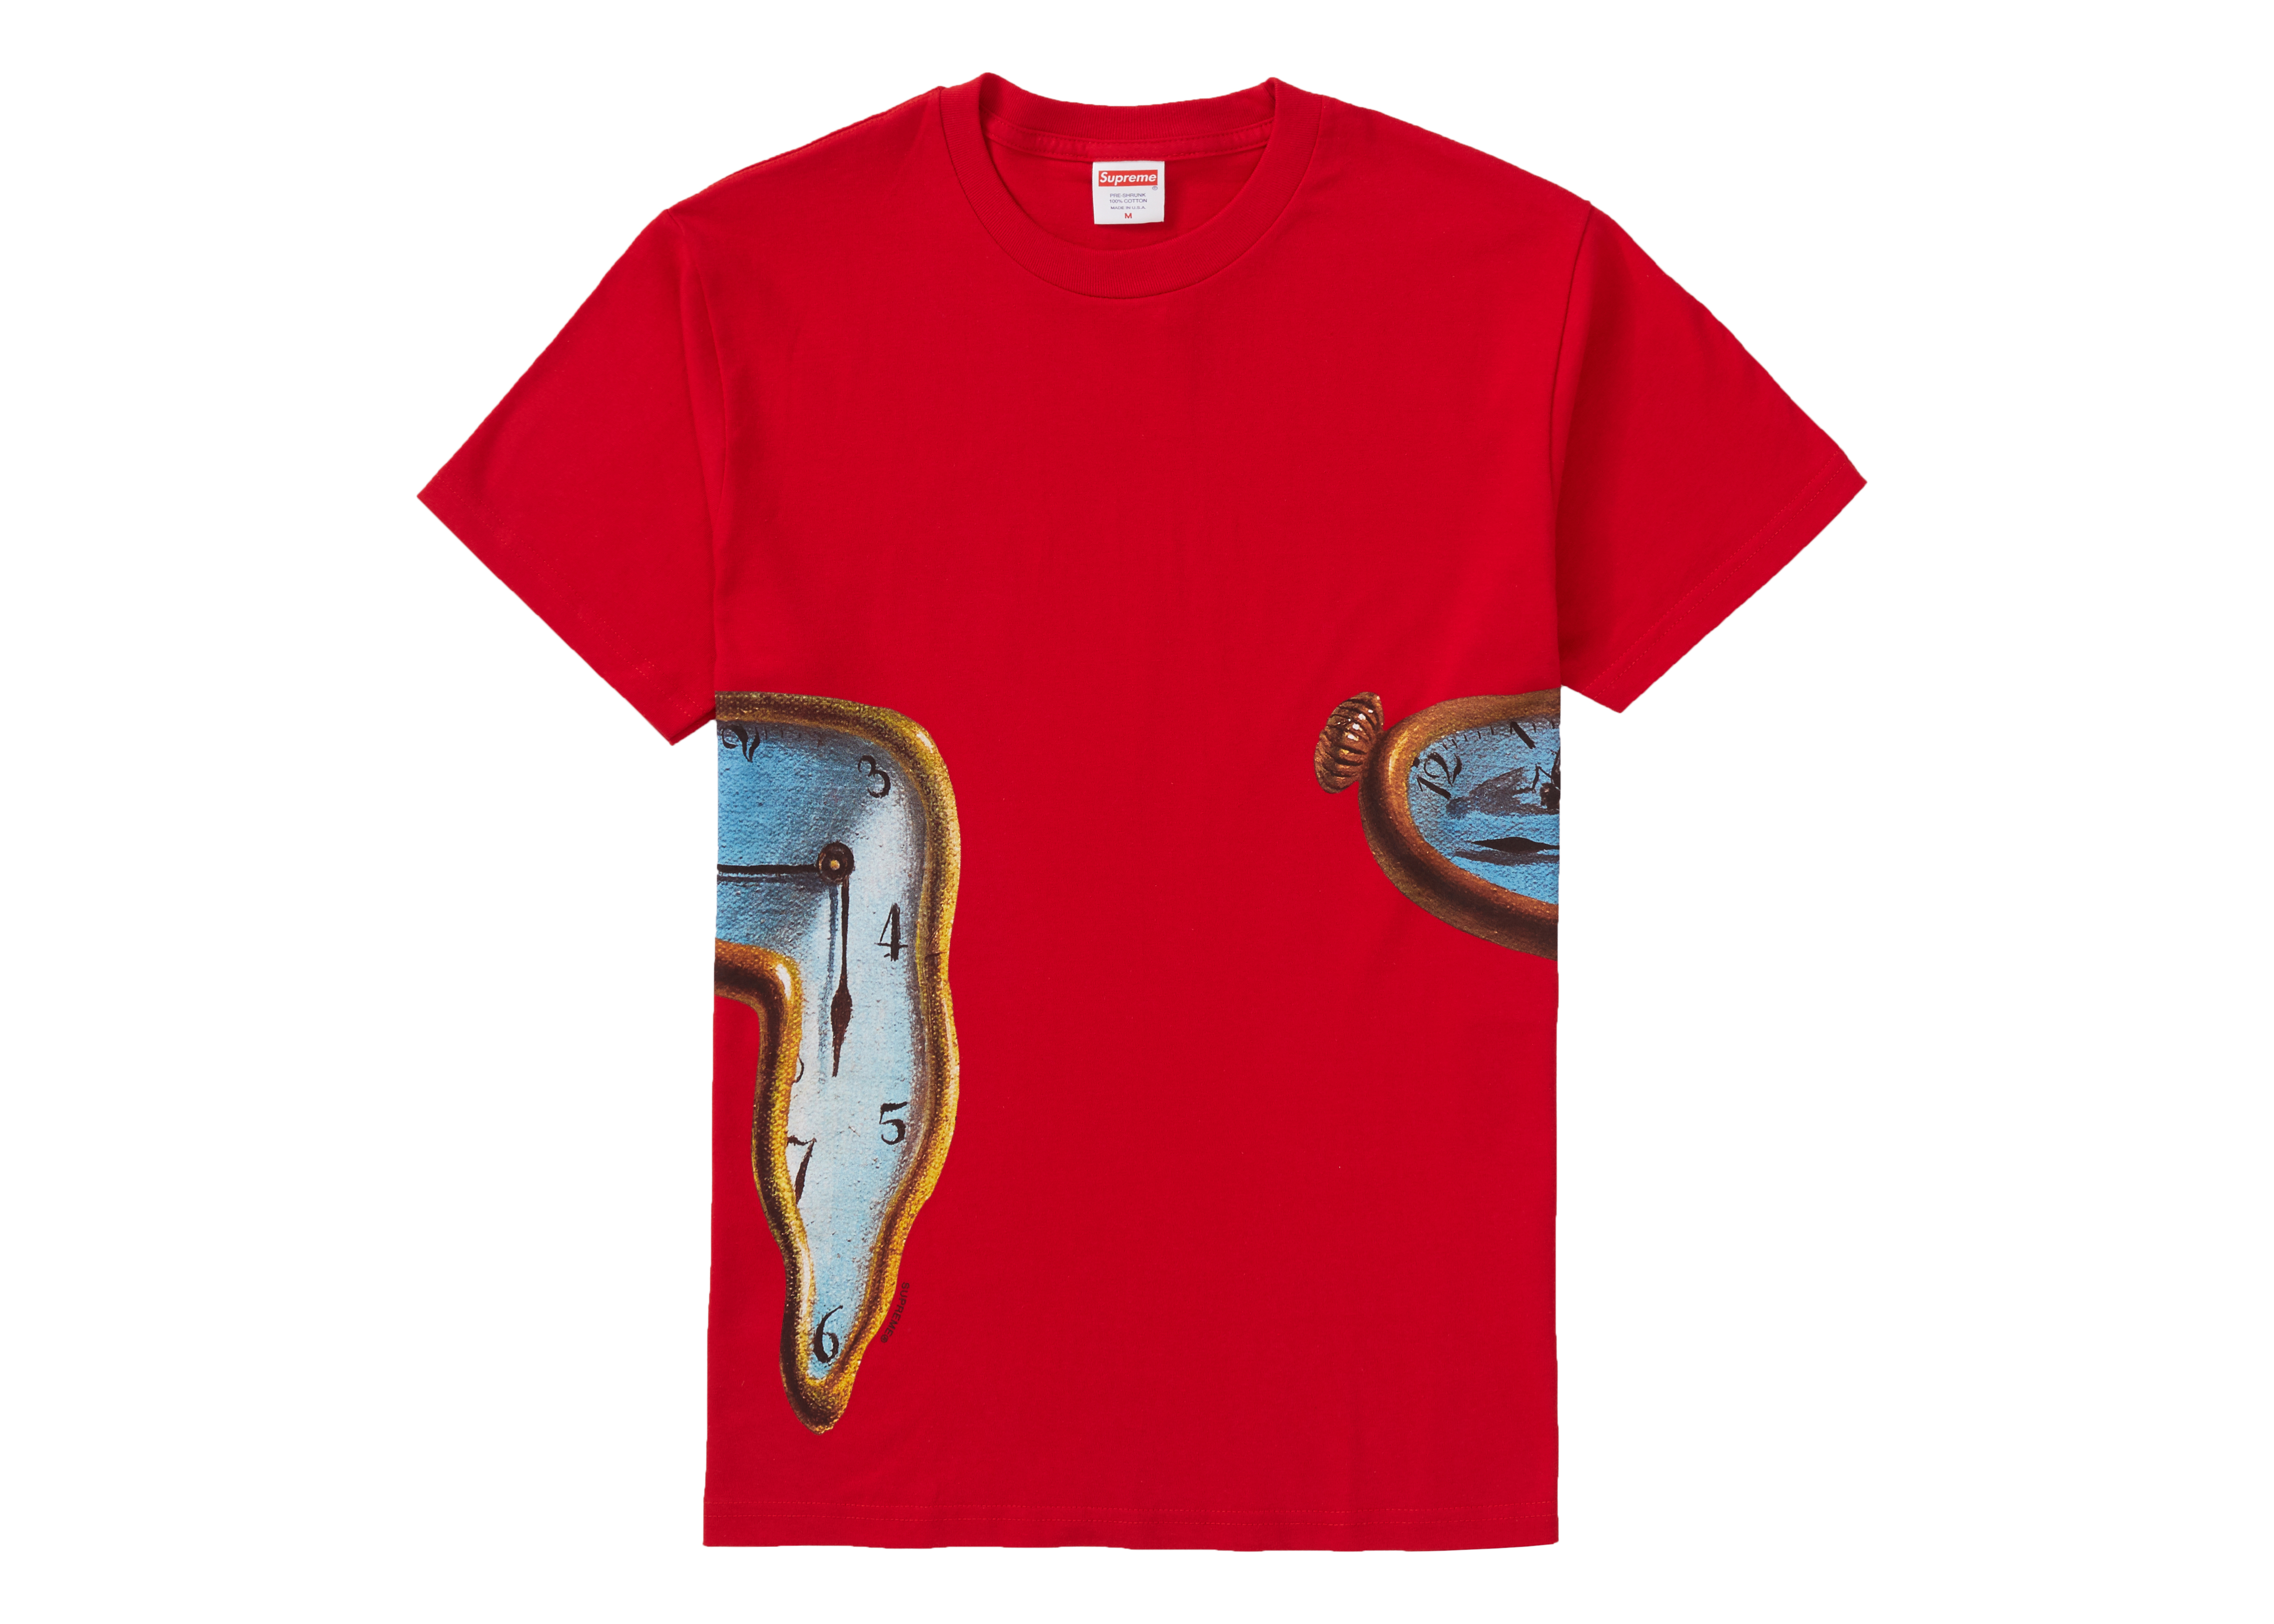 The Persistence Of Memory Tee